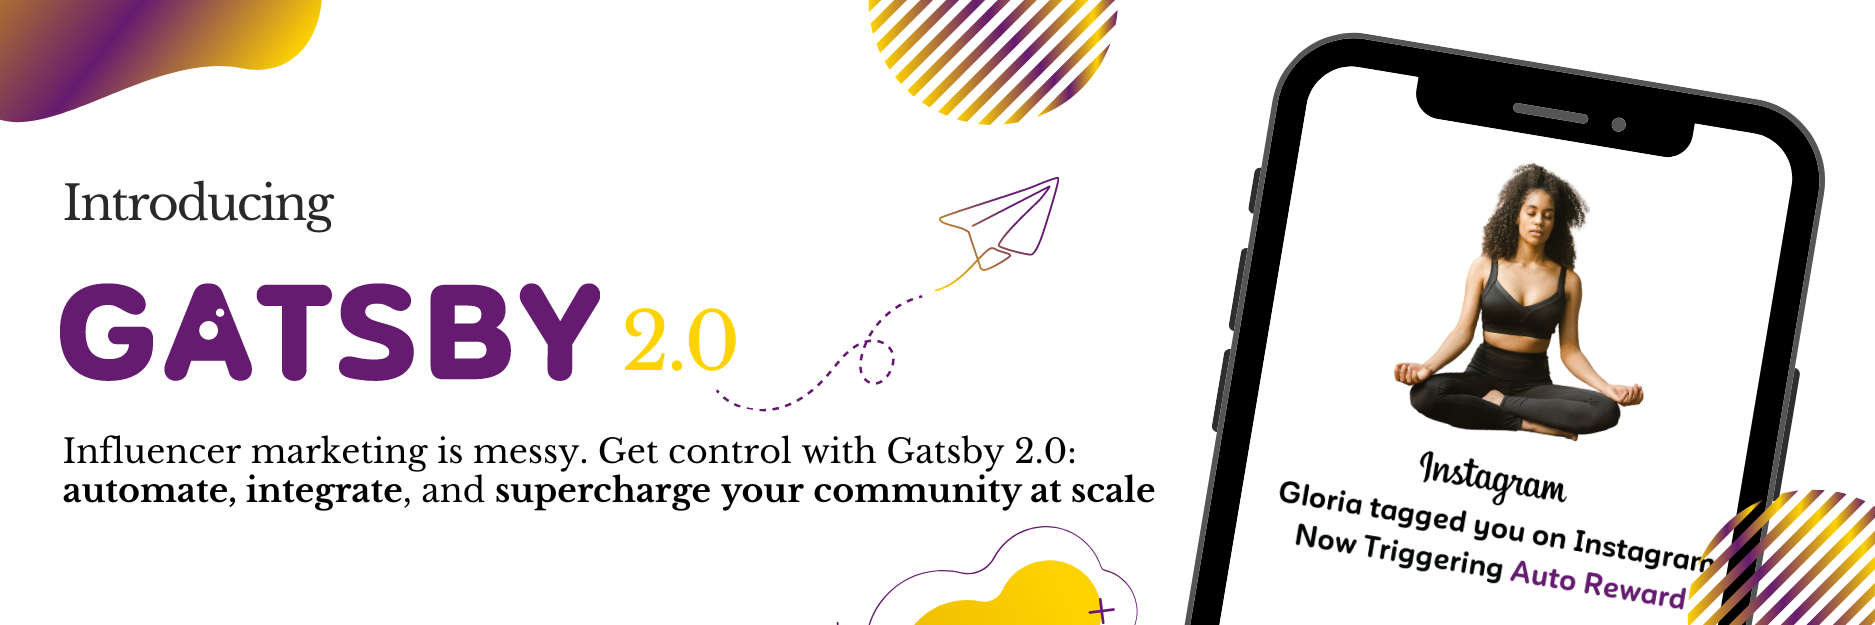 Gatsby 2.0 is Here!